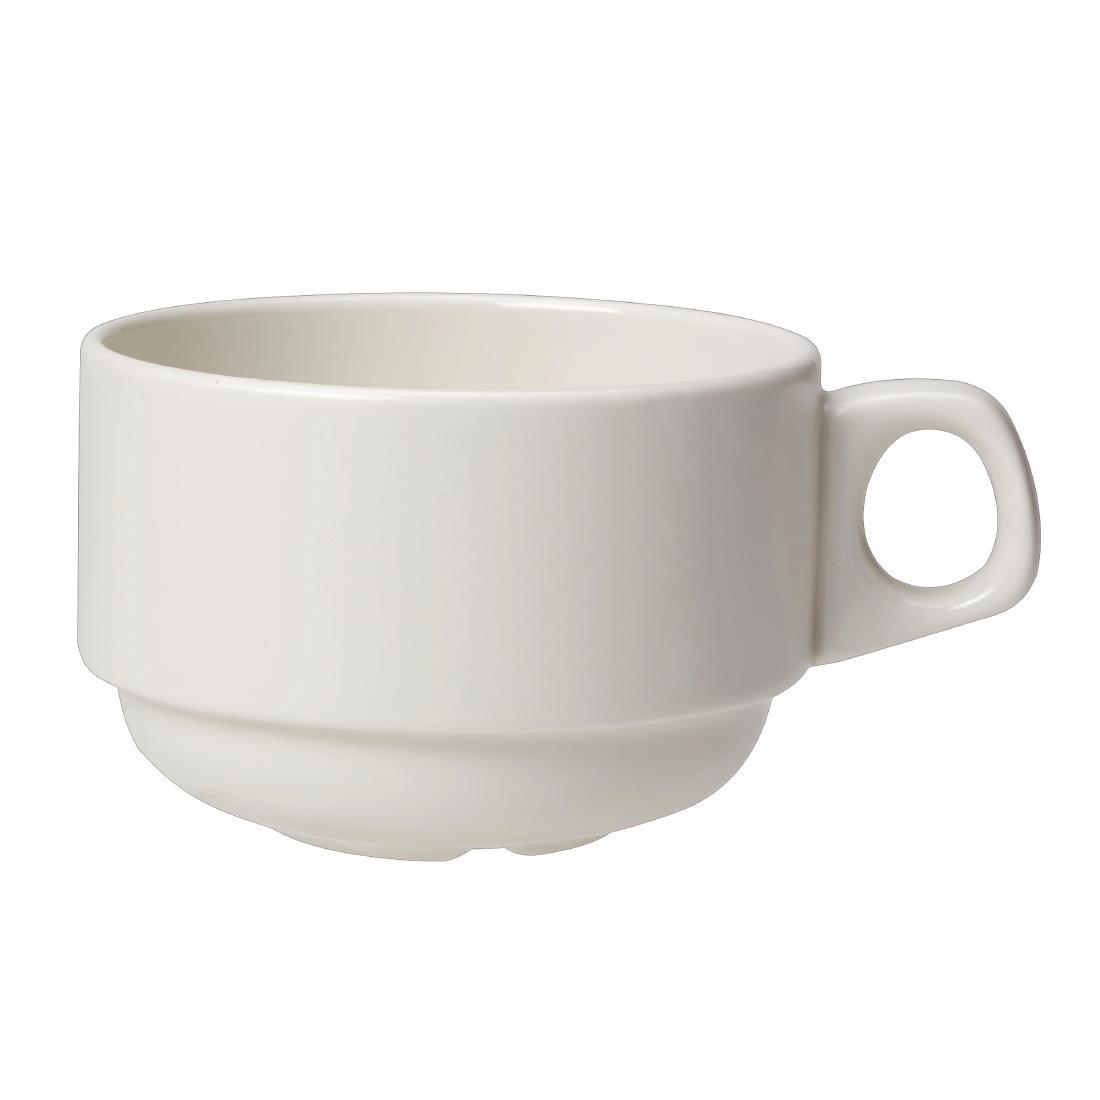 Steelite Simplicity S Line White Stacking Cups 10oz 285ml (Pack of 36) - VV1253  - 1